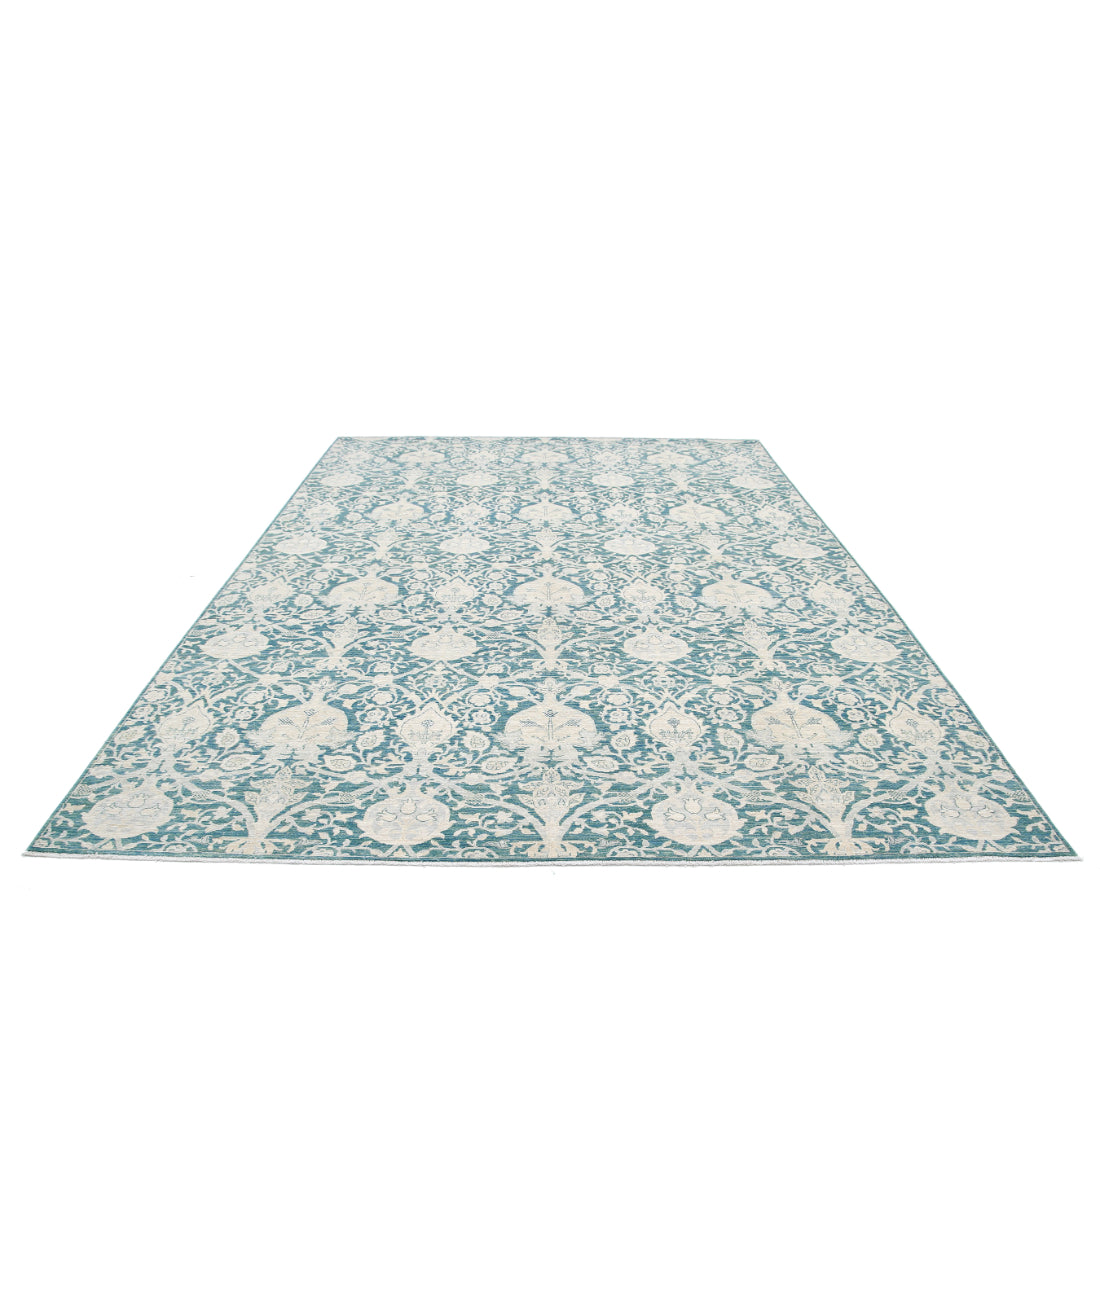 Hand Knotted Serenity Artemix Wool Rug - 8'10'' x 11'11'' 8'10'' x 11'11'' (265 X 358) / Green / Ivory